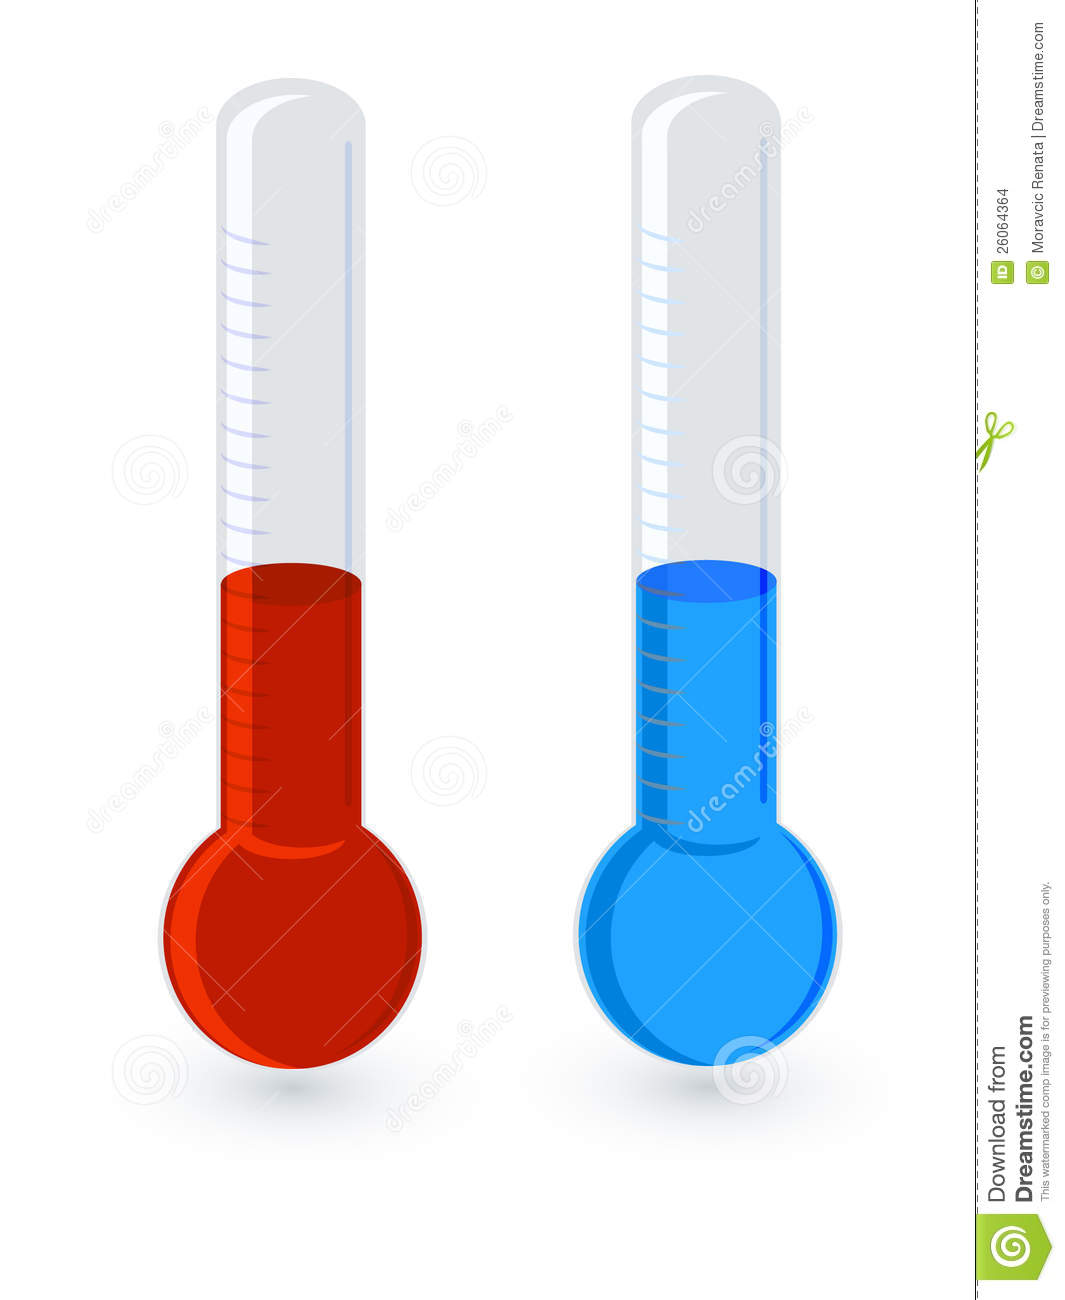 Hot And Cold Thermometer Clip Art Thermometer Hot Vs Cold 26064364 Jpg